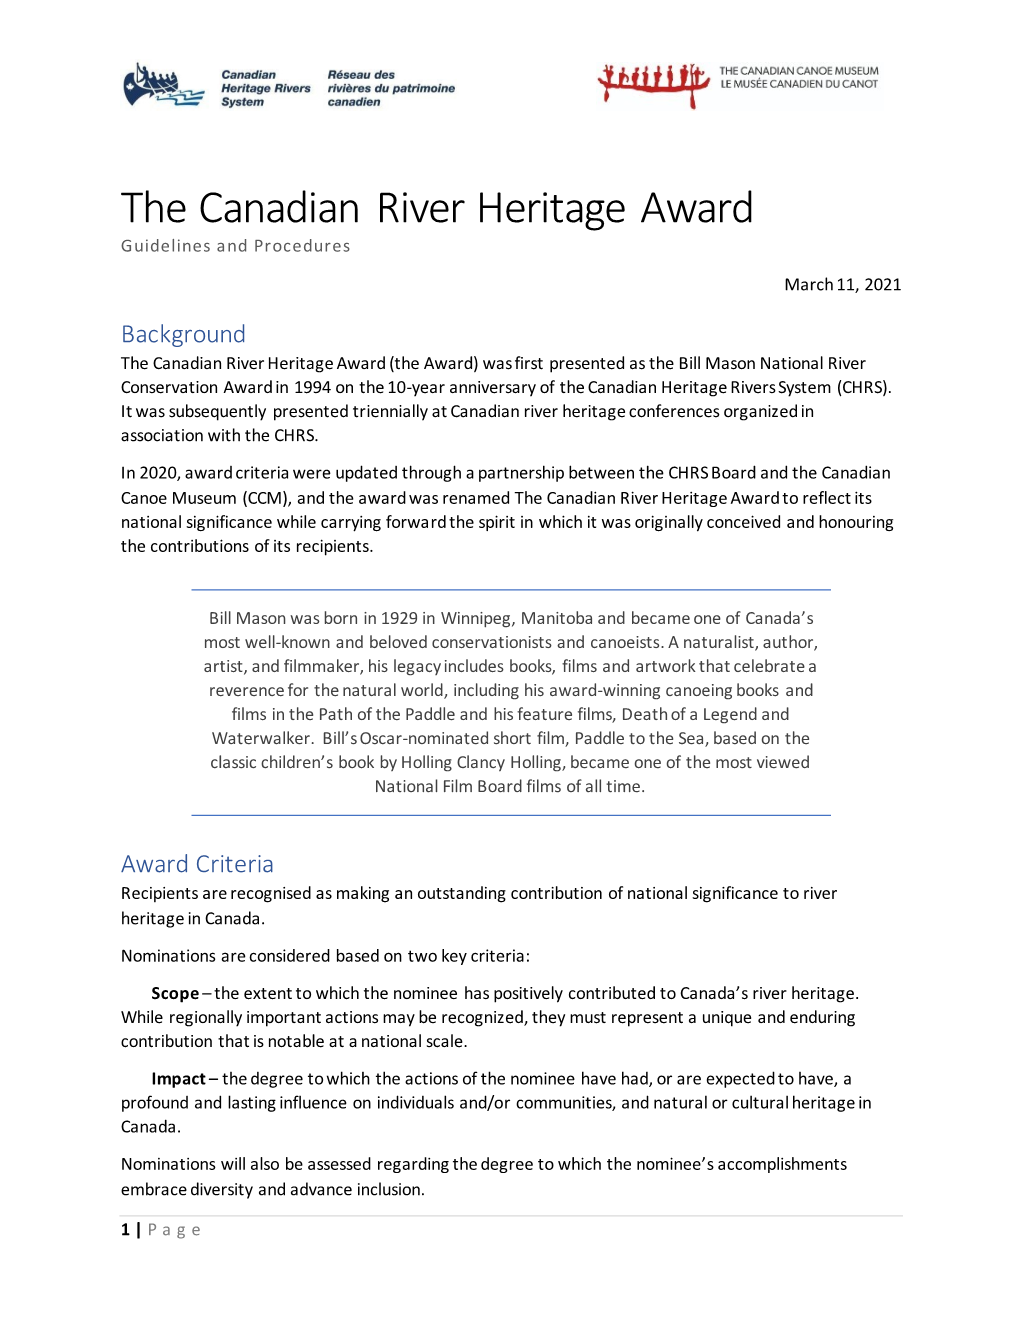 The Canadian River Heritage Award Guidelines and Procedures